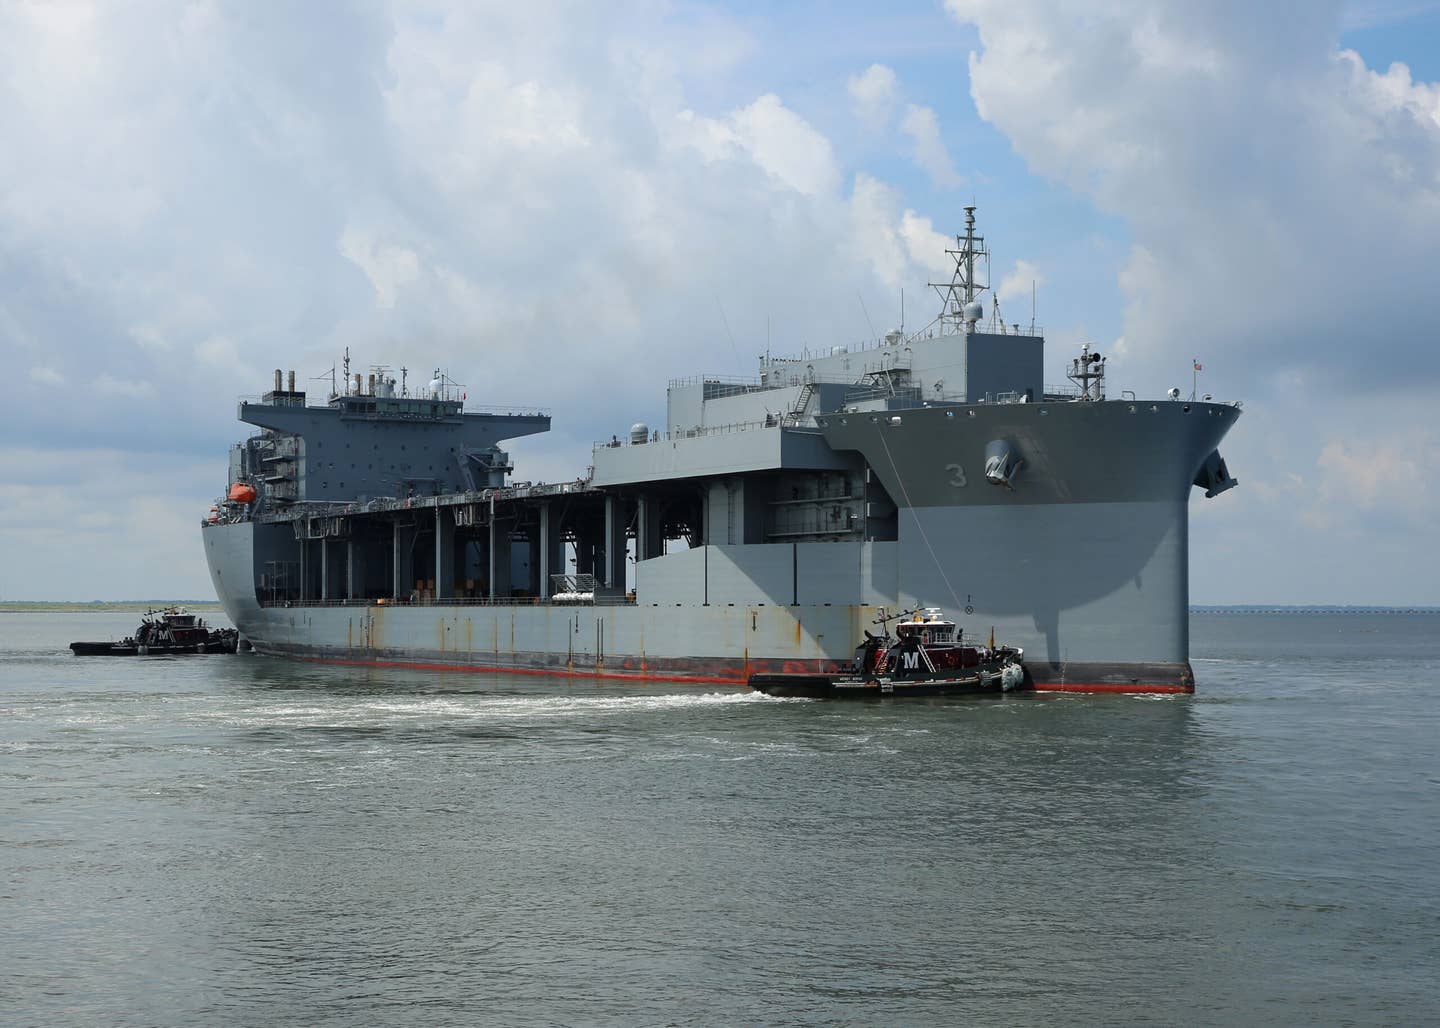 The ammunition transferred to Ukraine was originally seized by a security team from the Expeditionary Mobile Base <em>USNS Lewis B. "Chesty" Puller</em>, according to court records. (U.S. Navy photo by Bill Mesta/Released)